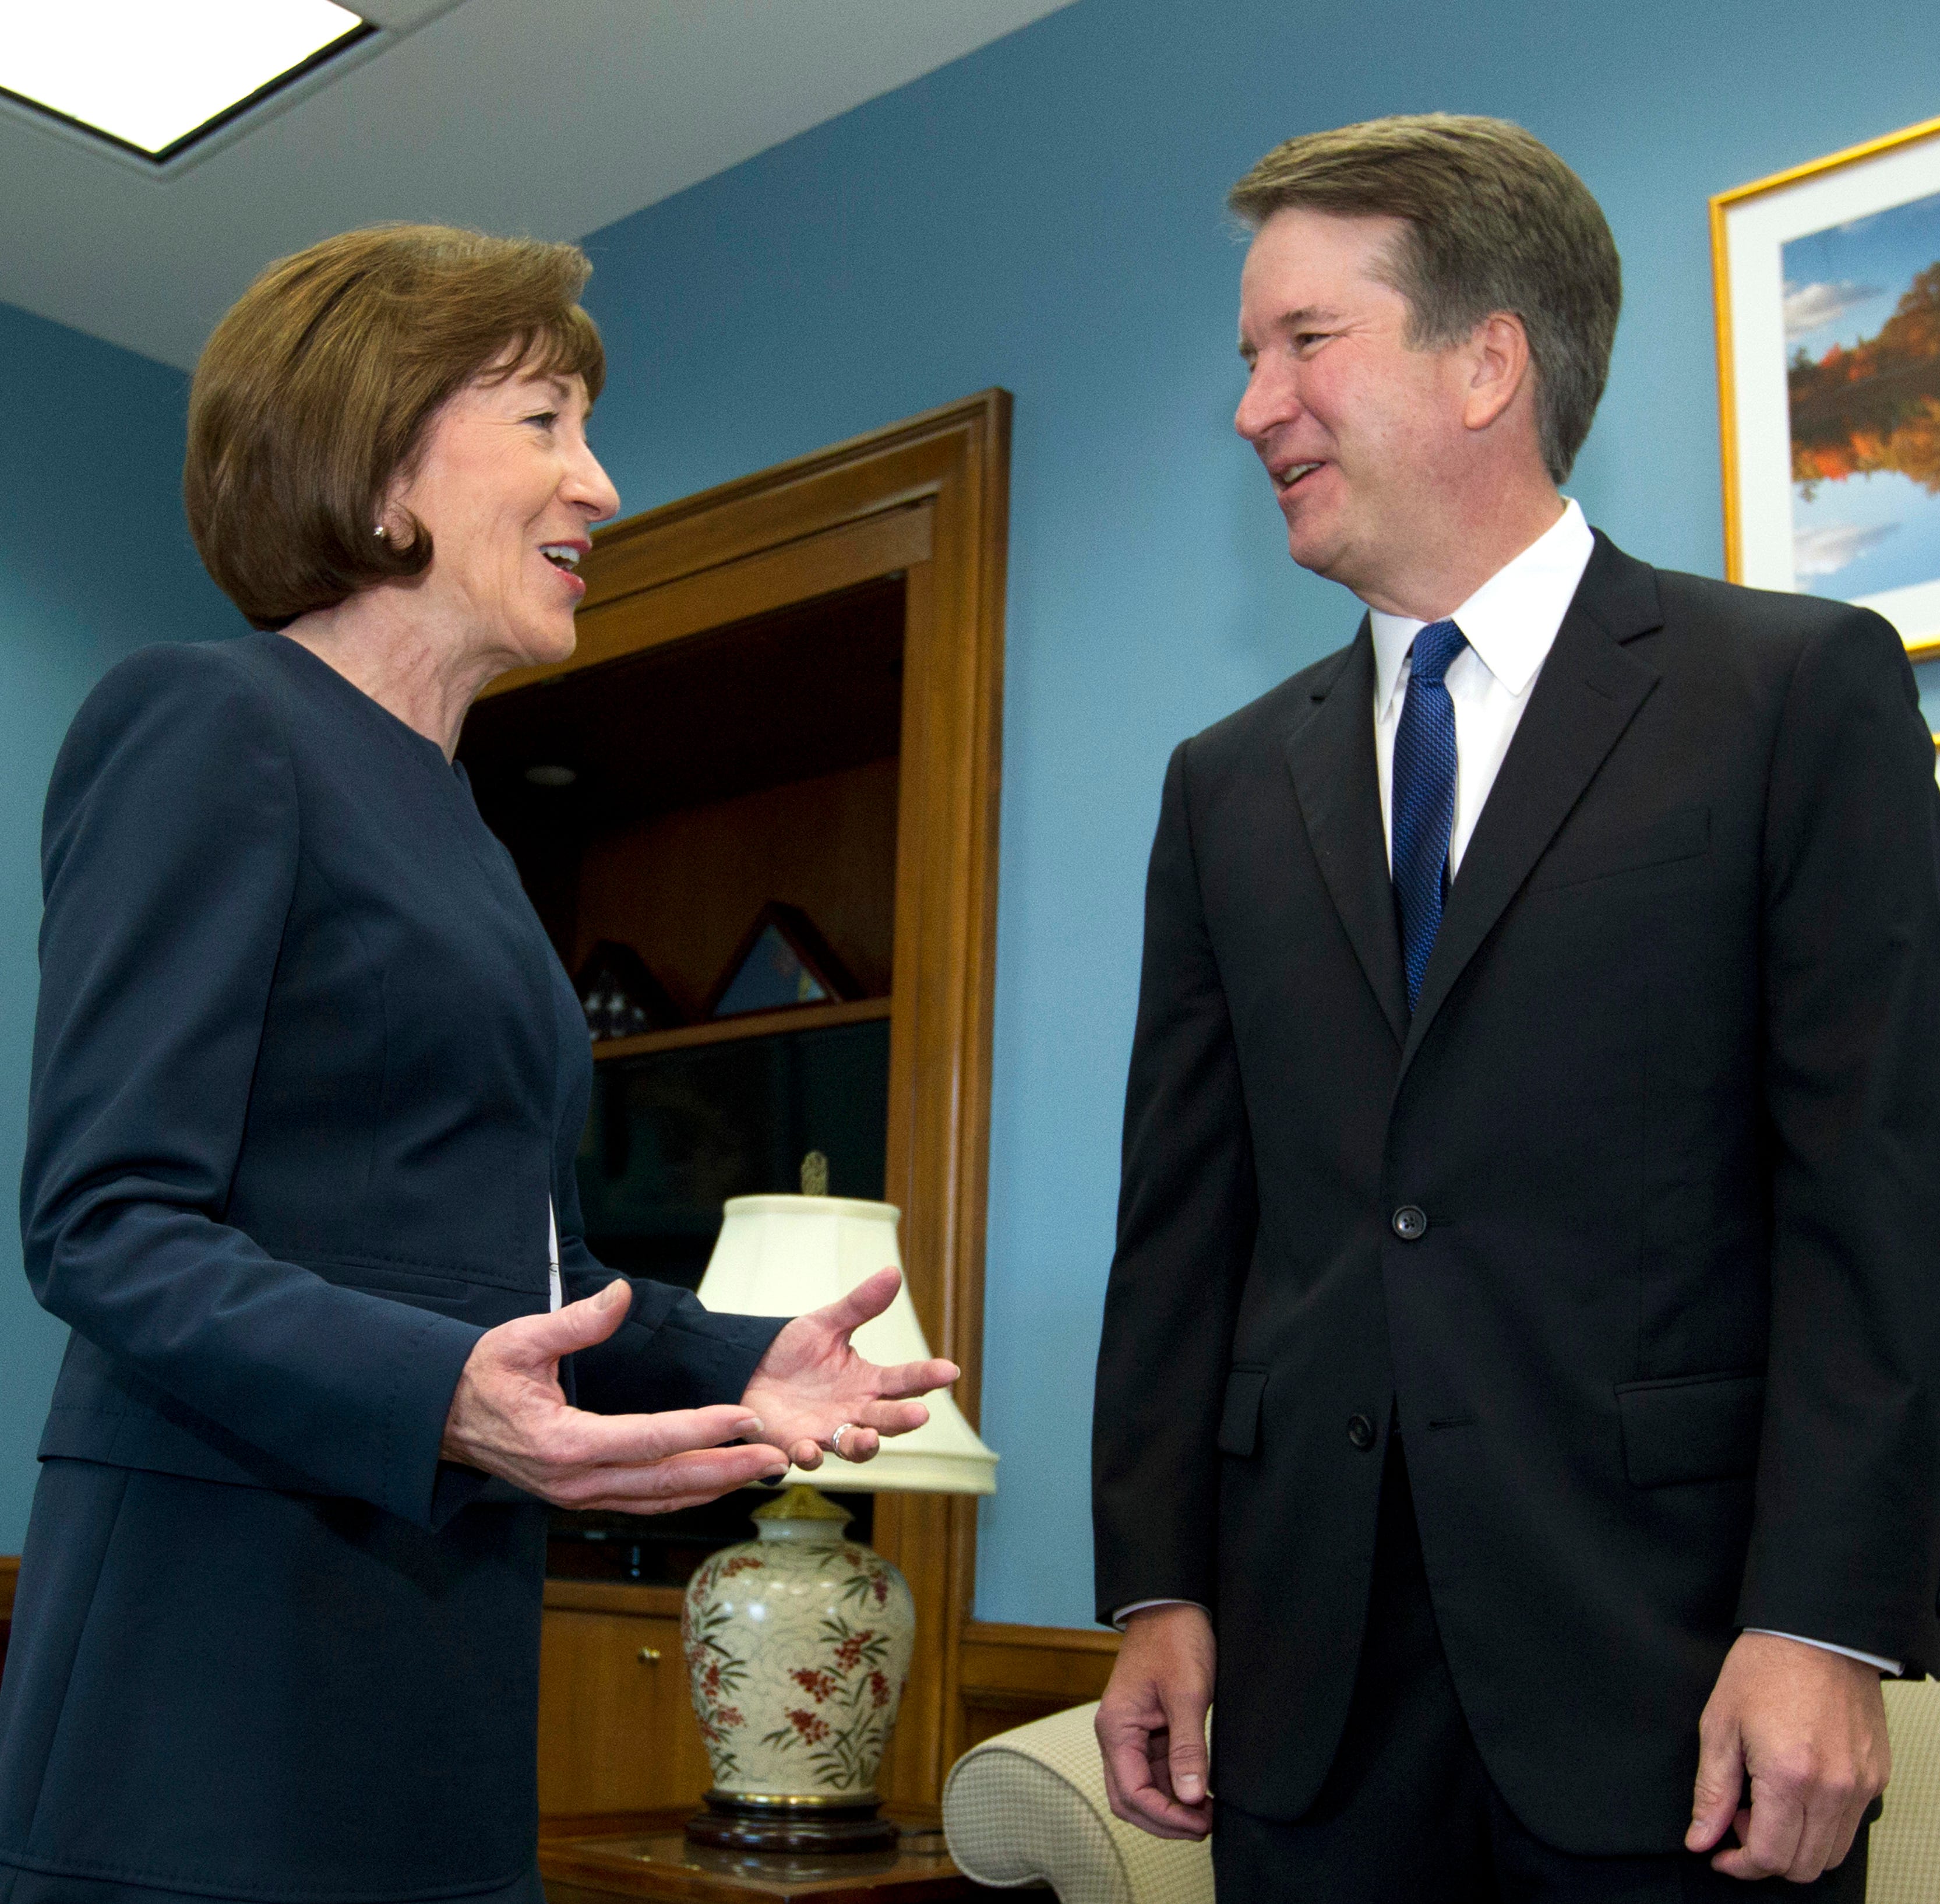 In this Tuesday, Aug. 21, 2018, file photo, Sen. Susan Collins, R-Maine, speaks with Supreme Court nominee Judge Brett Kavanaugh at her office, before a private meeting on Capitol Hill in Washington. Collins has been targeted by Democrats hoping that